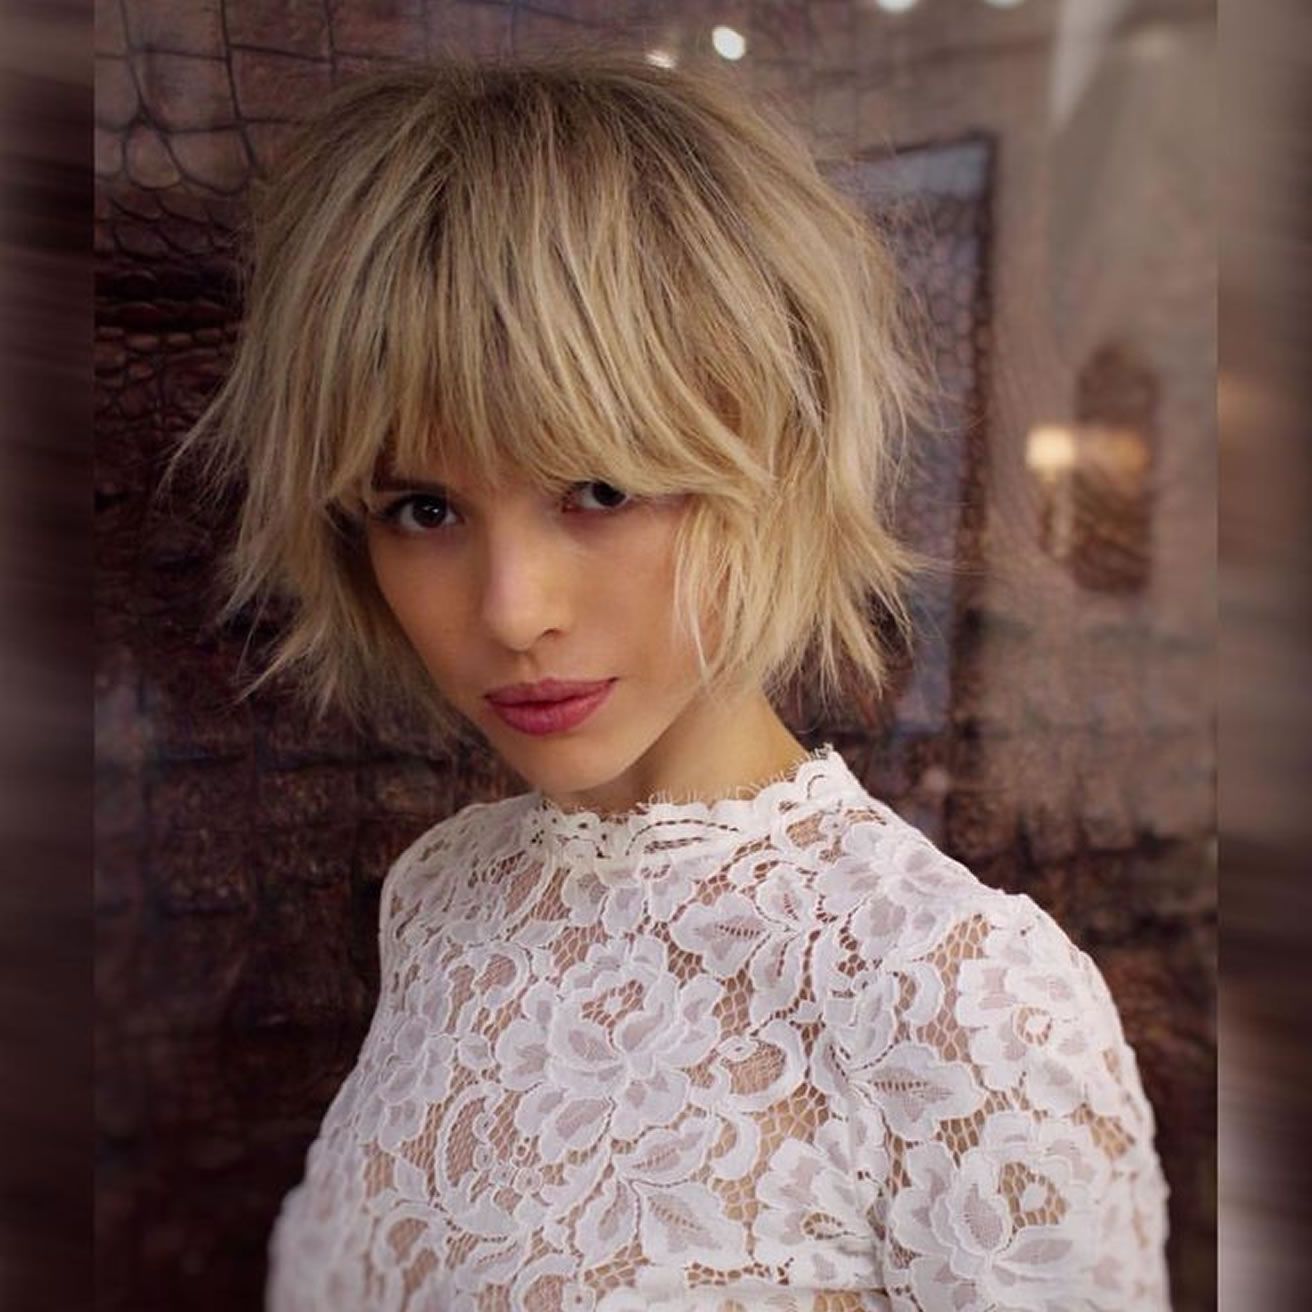 30 Best Asymmetric Short Haircuts For Women Of All Time – Page 2 With Regard To Asymmetric Short Haircuts (View 23 of 25)